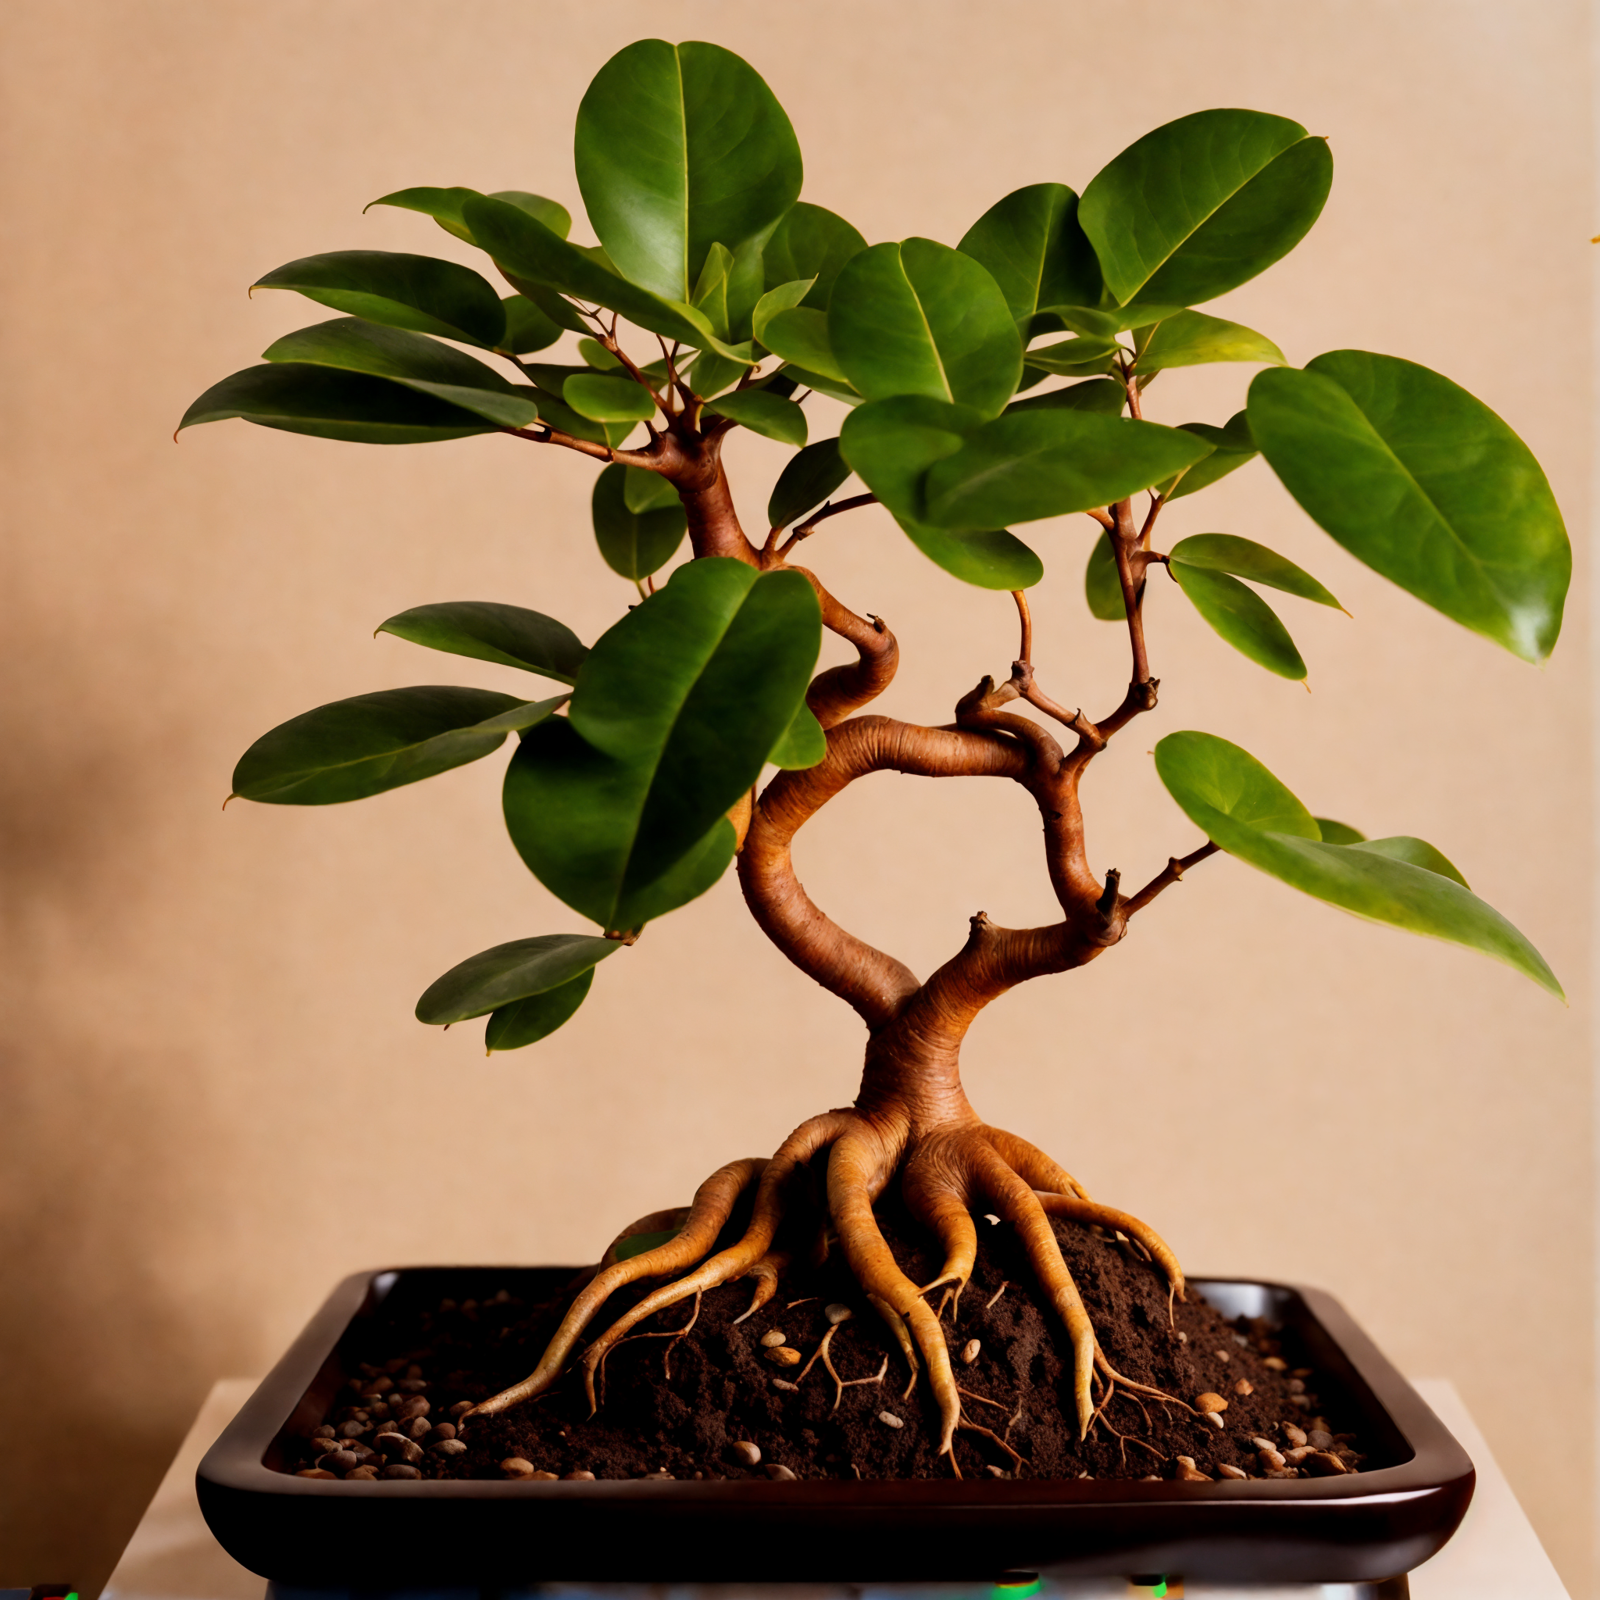 Ficus microcarpa bonsai in a bowl planter, with clear lighting and a dark background, indoors.